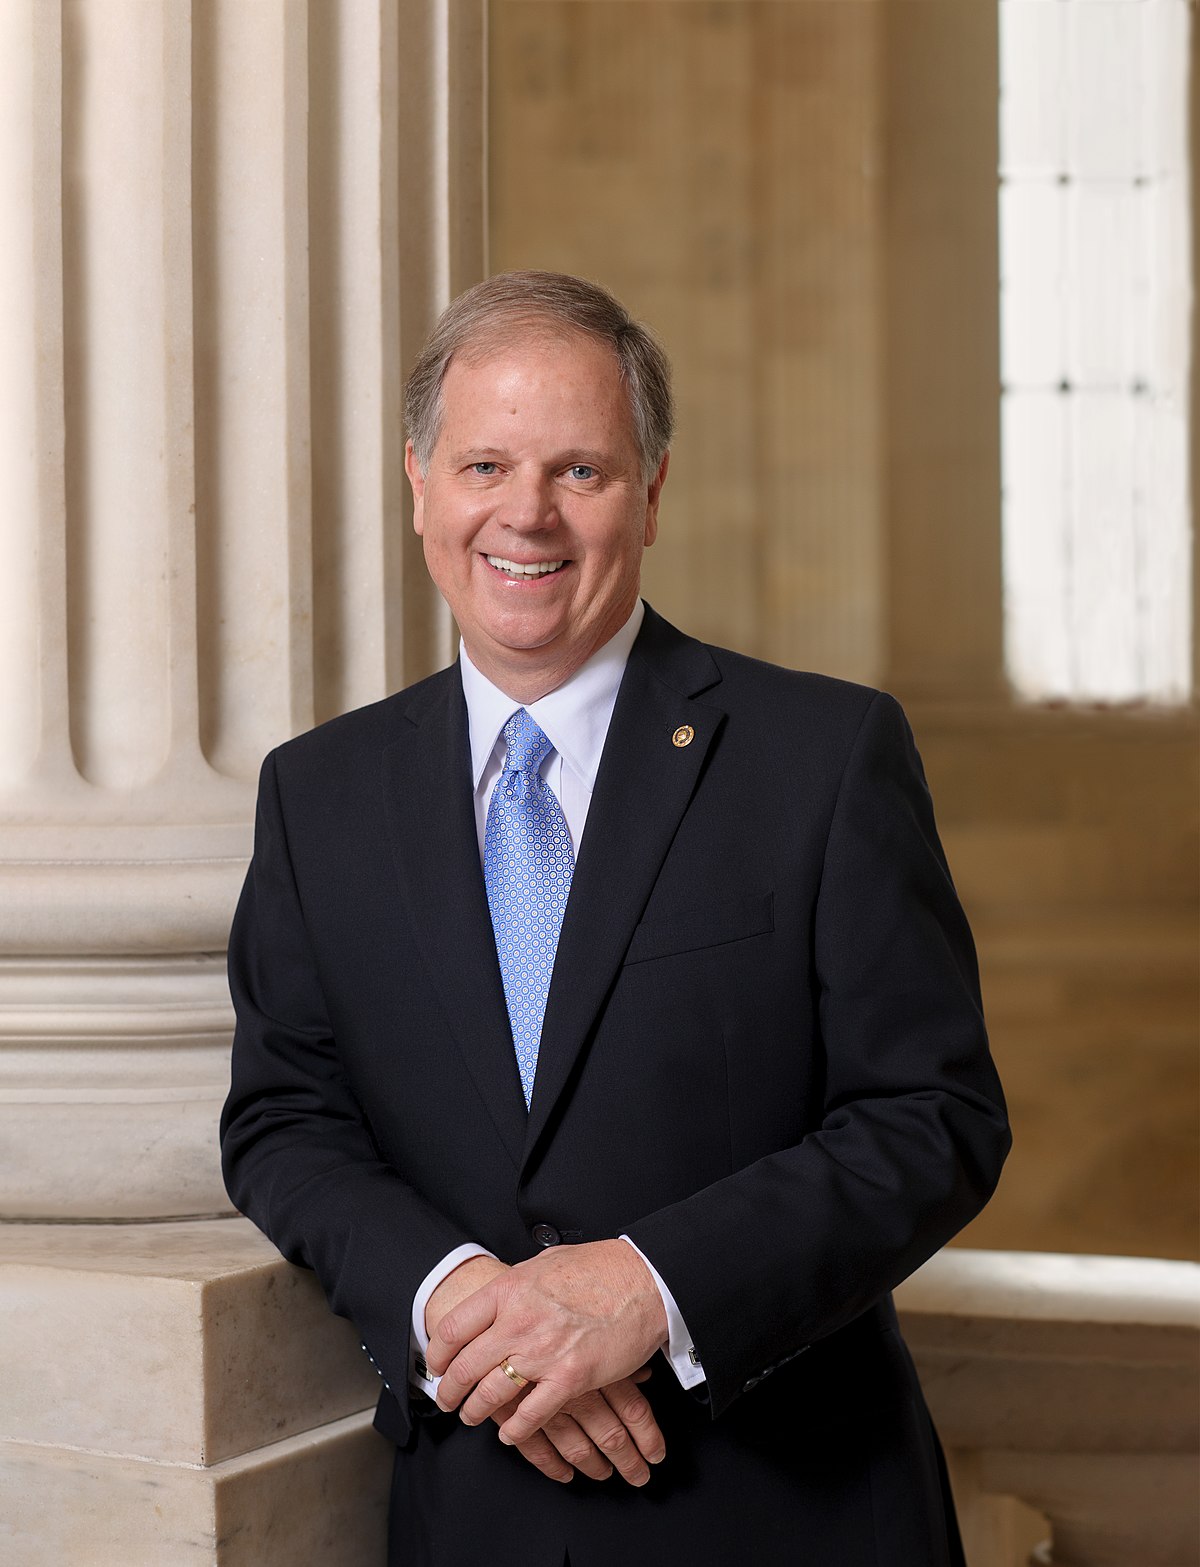 Sen. Doug Jones introduces legislation last week: Gold Star Family Tax Relief Act and Assistance for Farmers Harmed by Tariffs on Exports Act